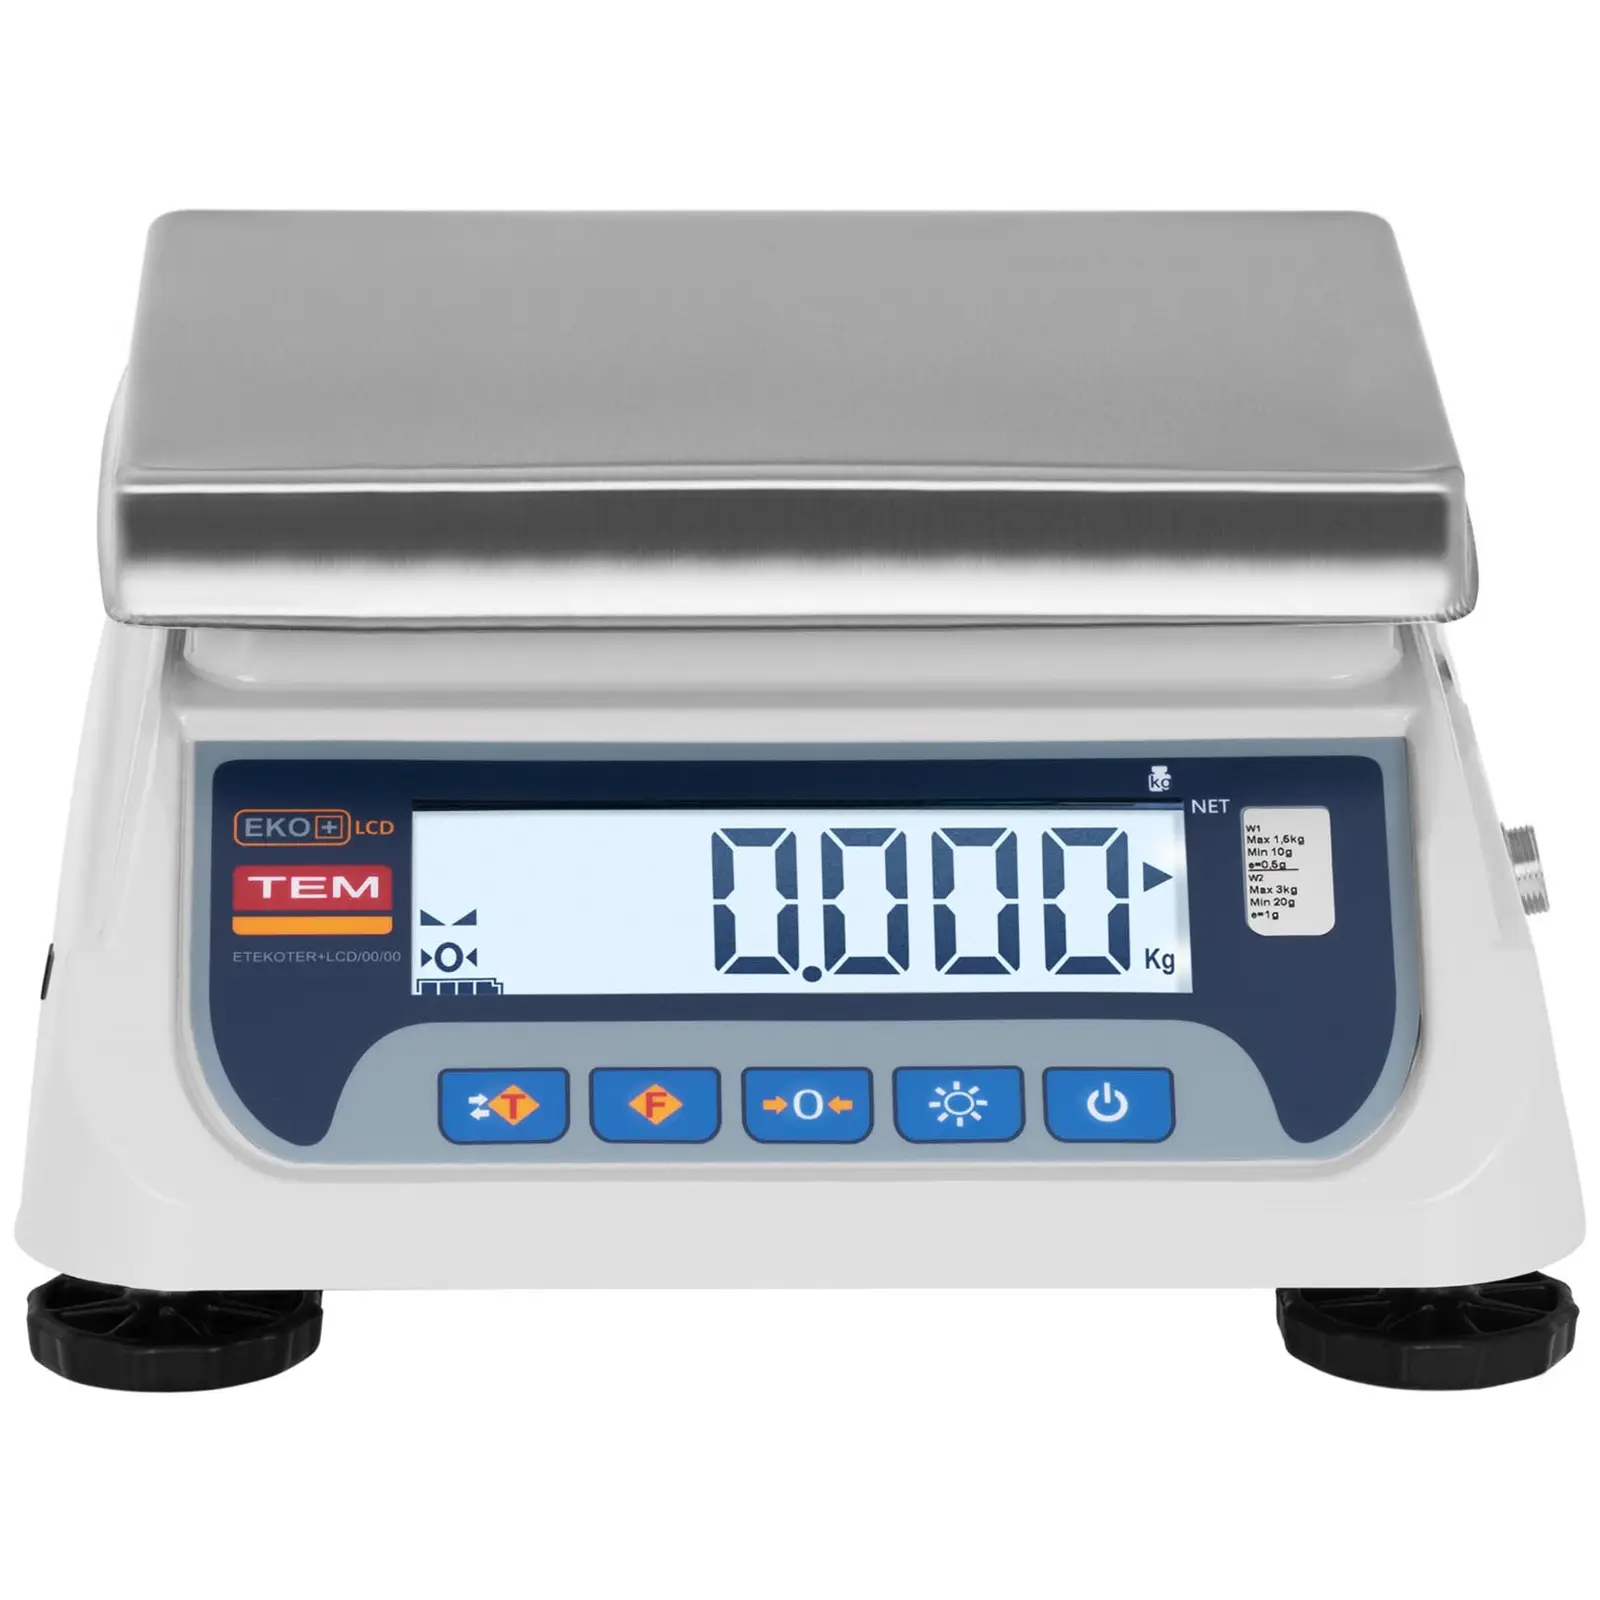 Table Scale - calibrated - 3 kg / 1 g - LCD